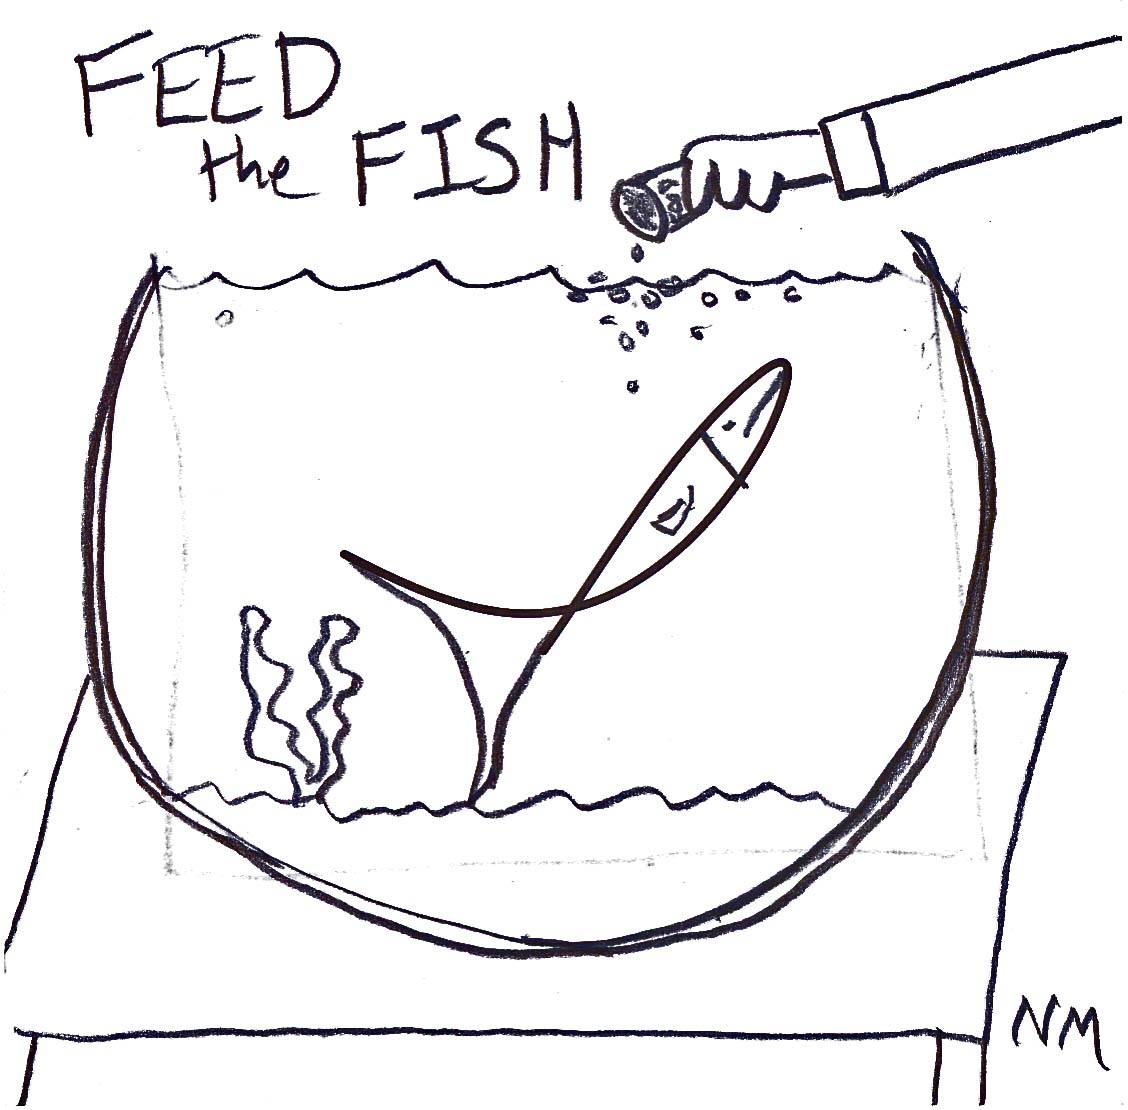 Feed The Fish